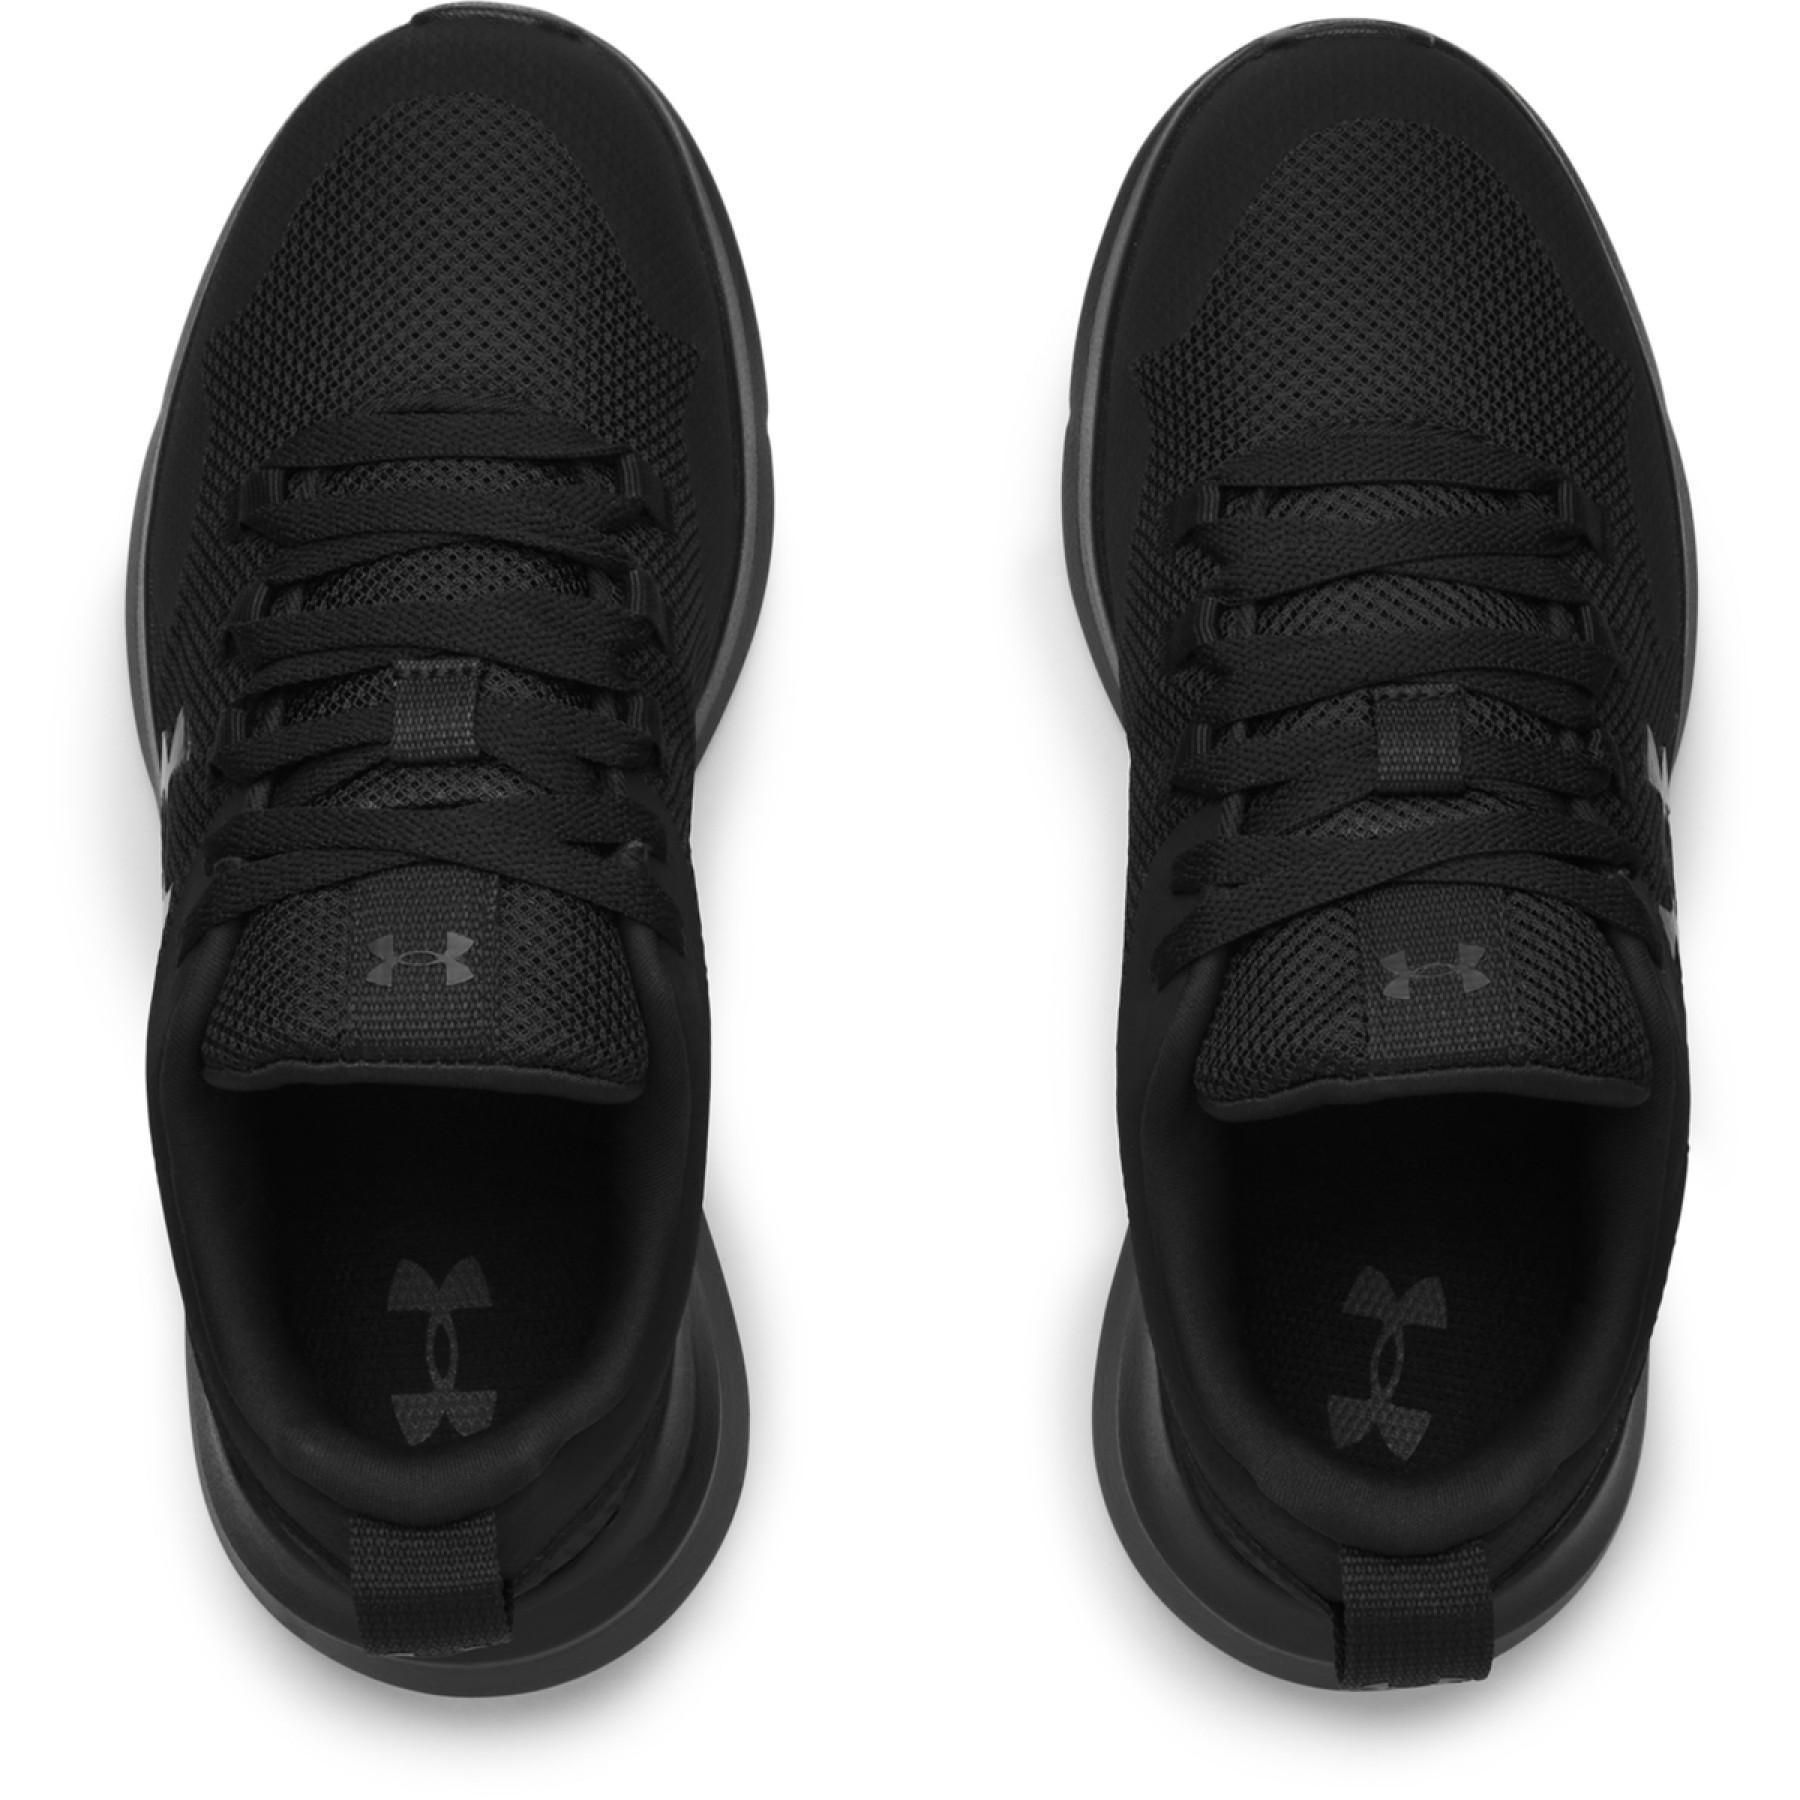 Chaussures femme Under Armour Essential Sportstyle